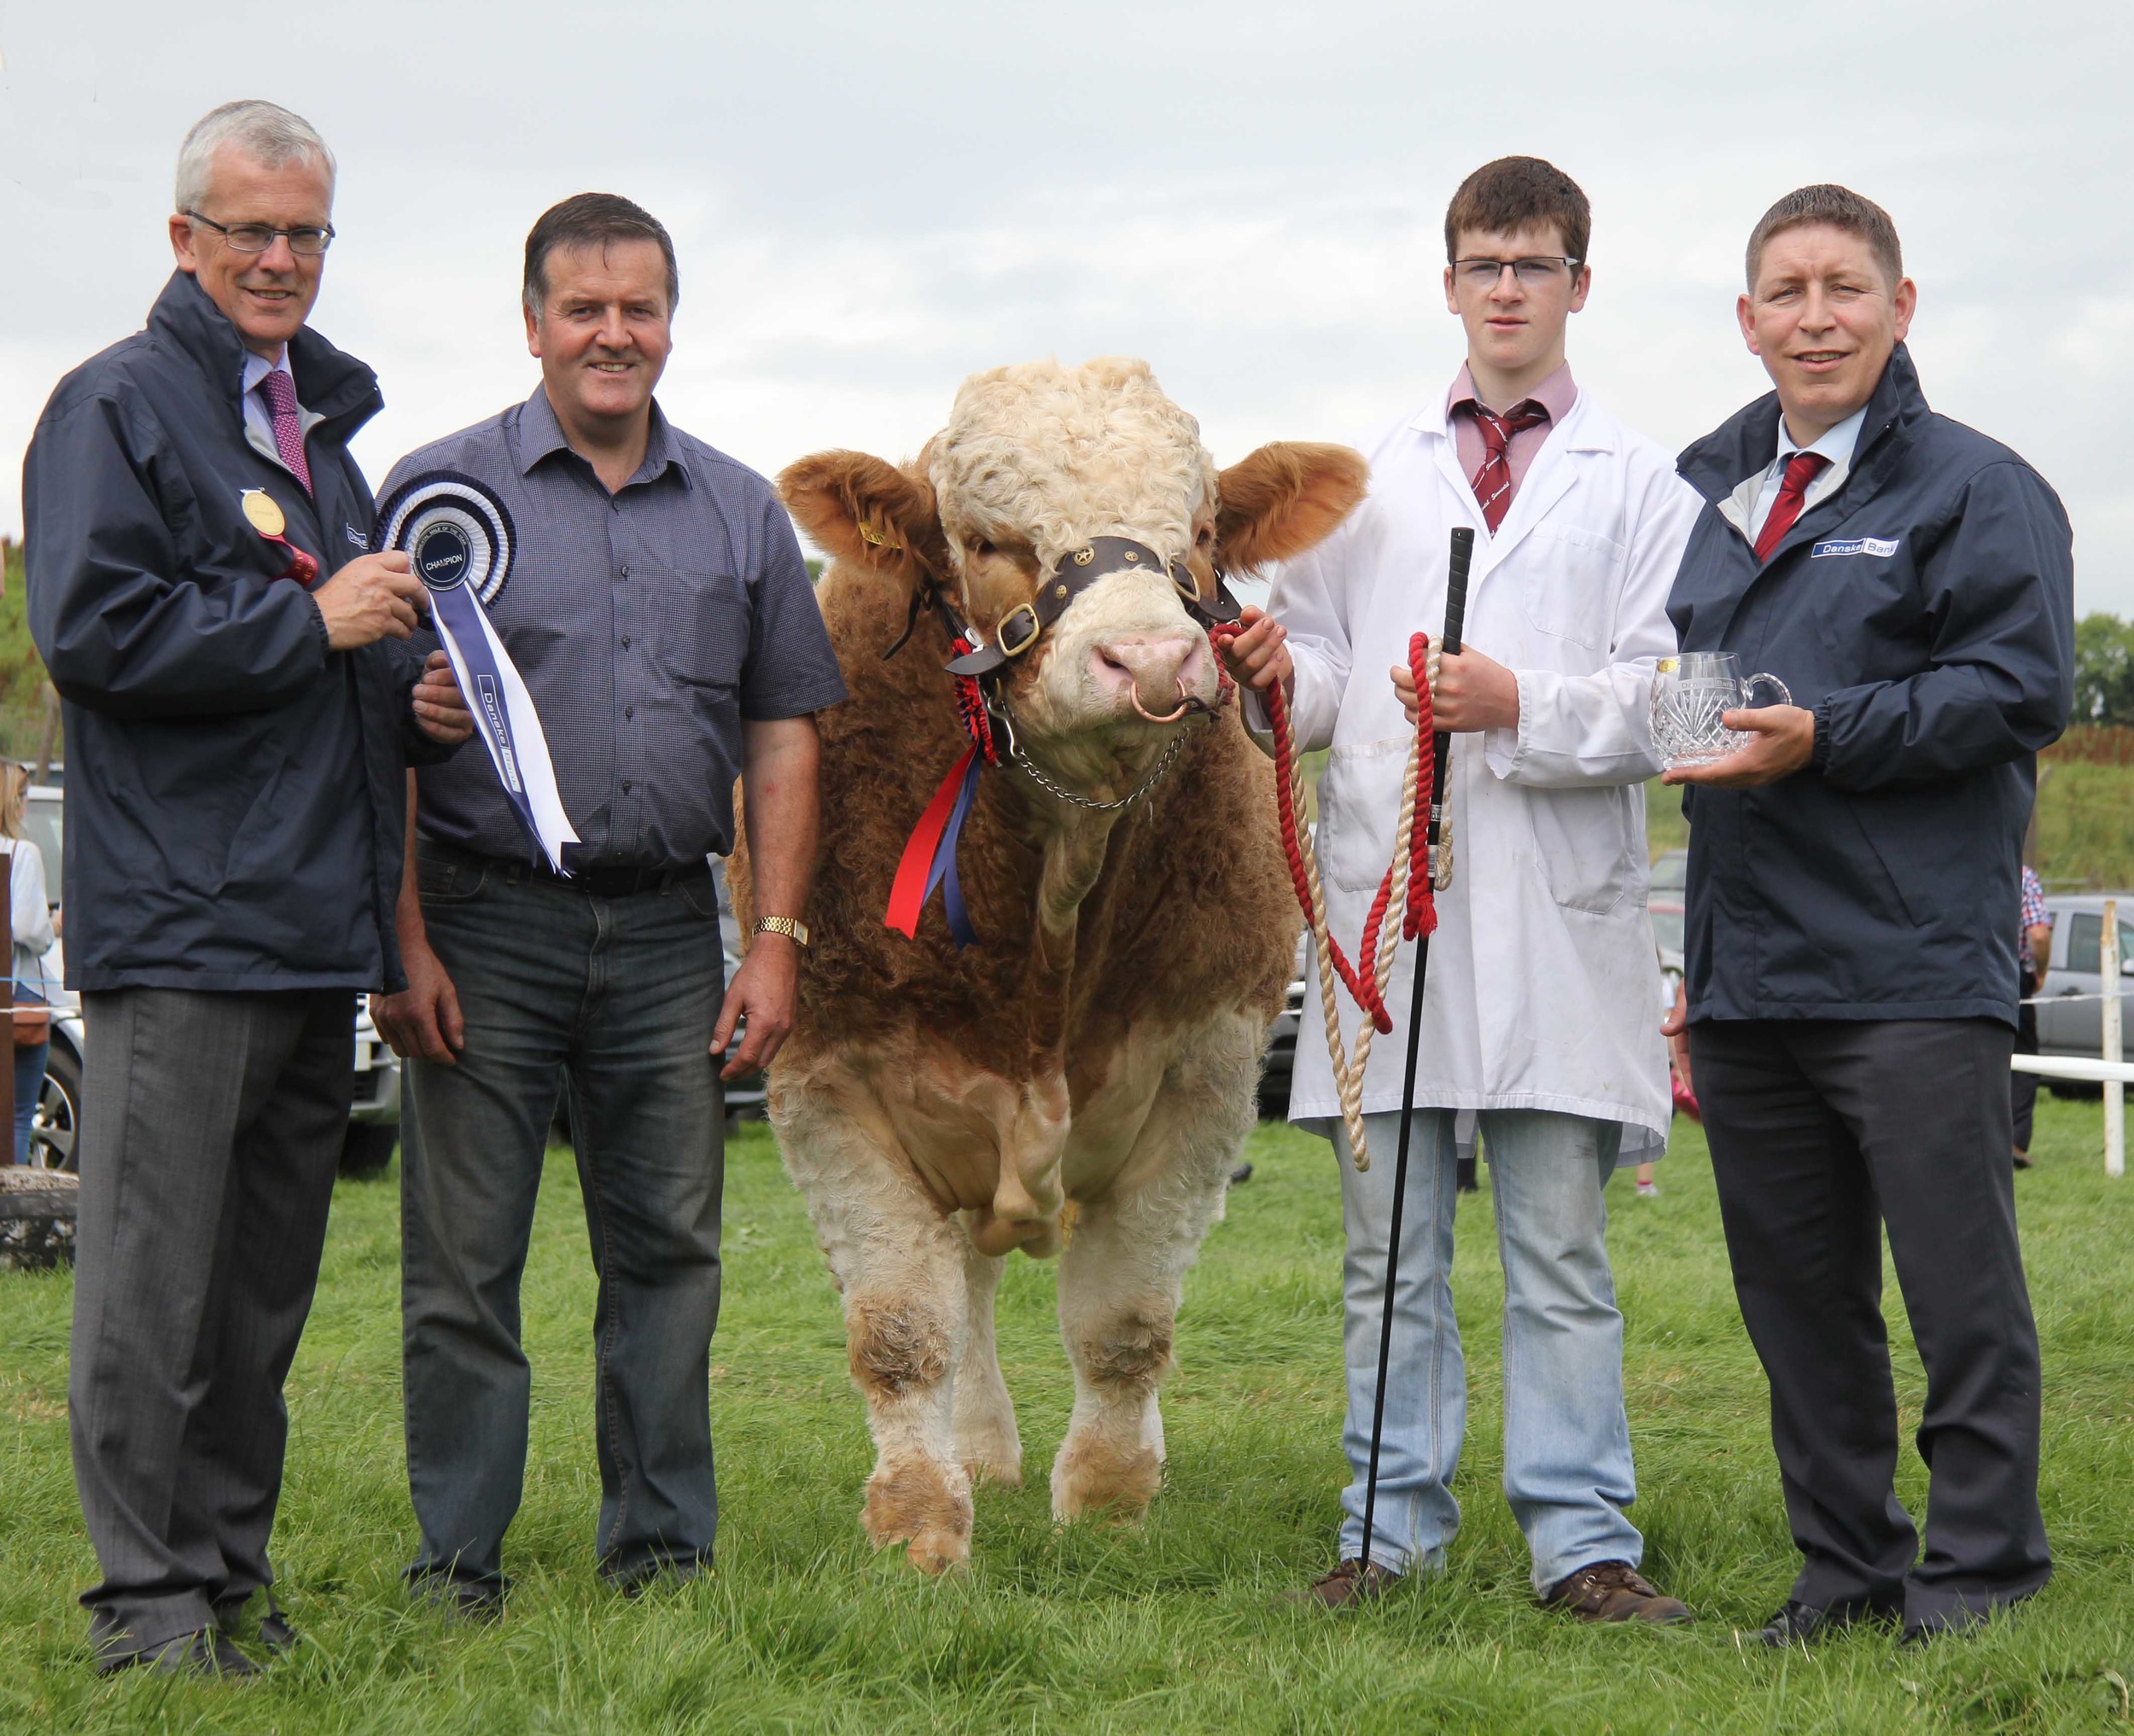 The Danske Bank Simmental Male of the Year award was won by Slievenagh Emperor bred by Robin Boyd, Portglenone, and shown by son Jamie. Making the presentation are sponsors John Henning and Rodney Brown, Danske Bank. 